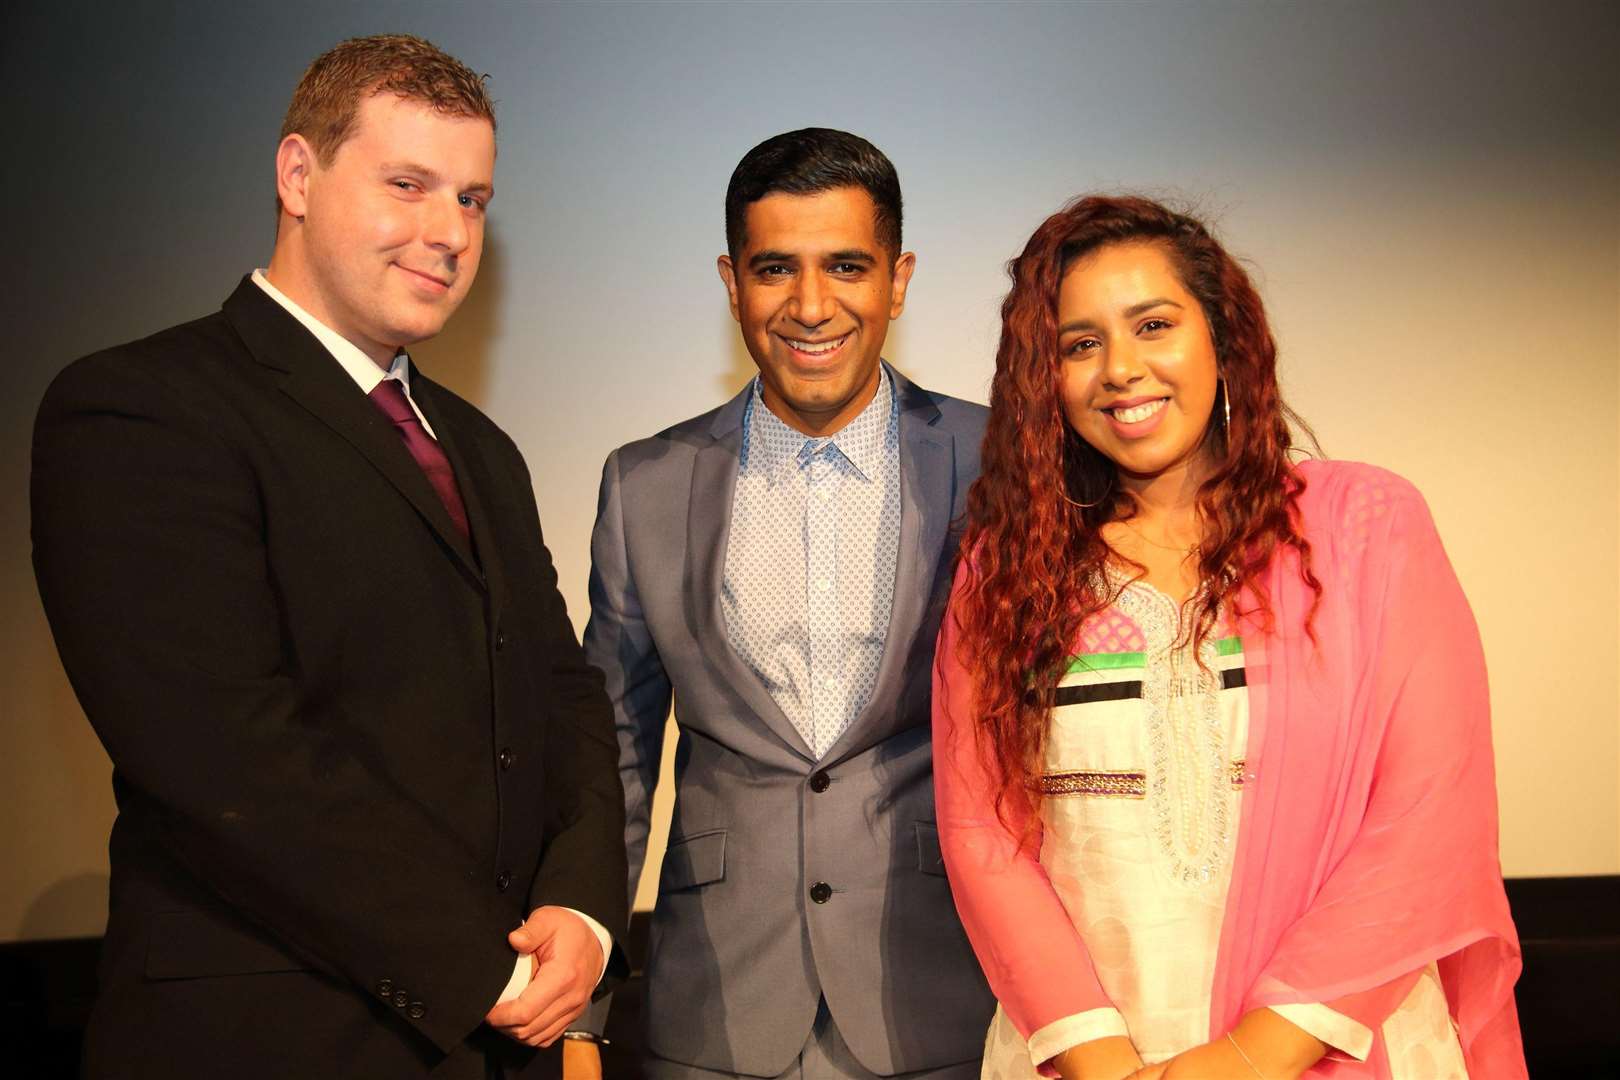 Samual Frain of GMM Films, Gurvinder Sandher CEO of Kent Equality Cohesion Council and Producer and Sonia Nayyar of Assistant Producer of the film (1478021)